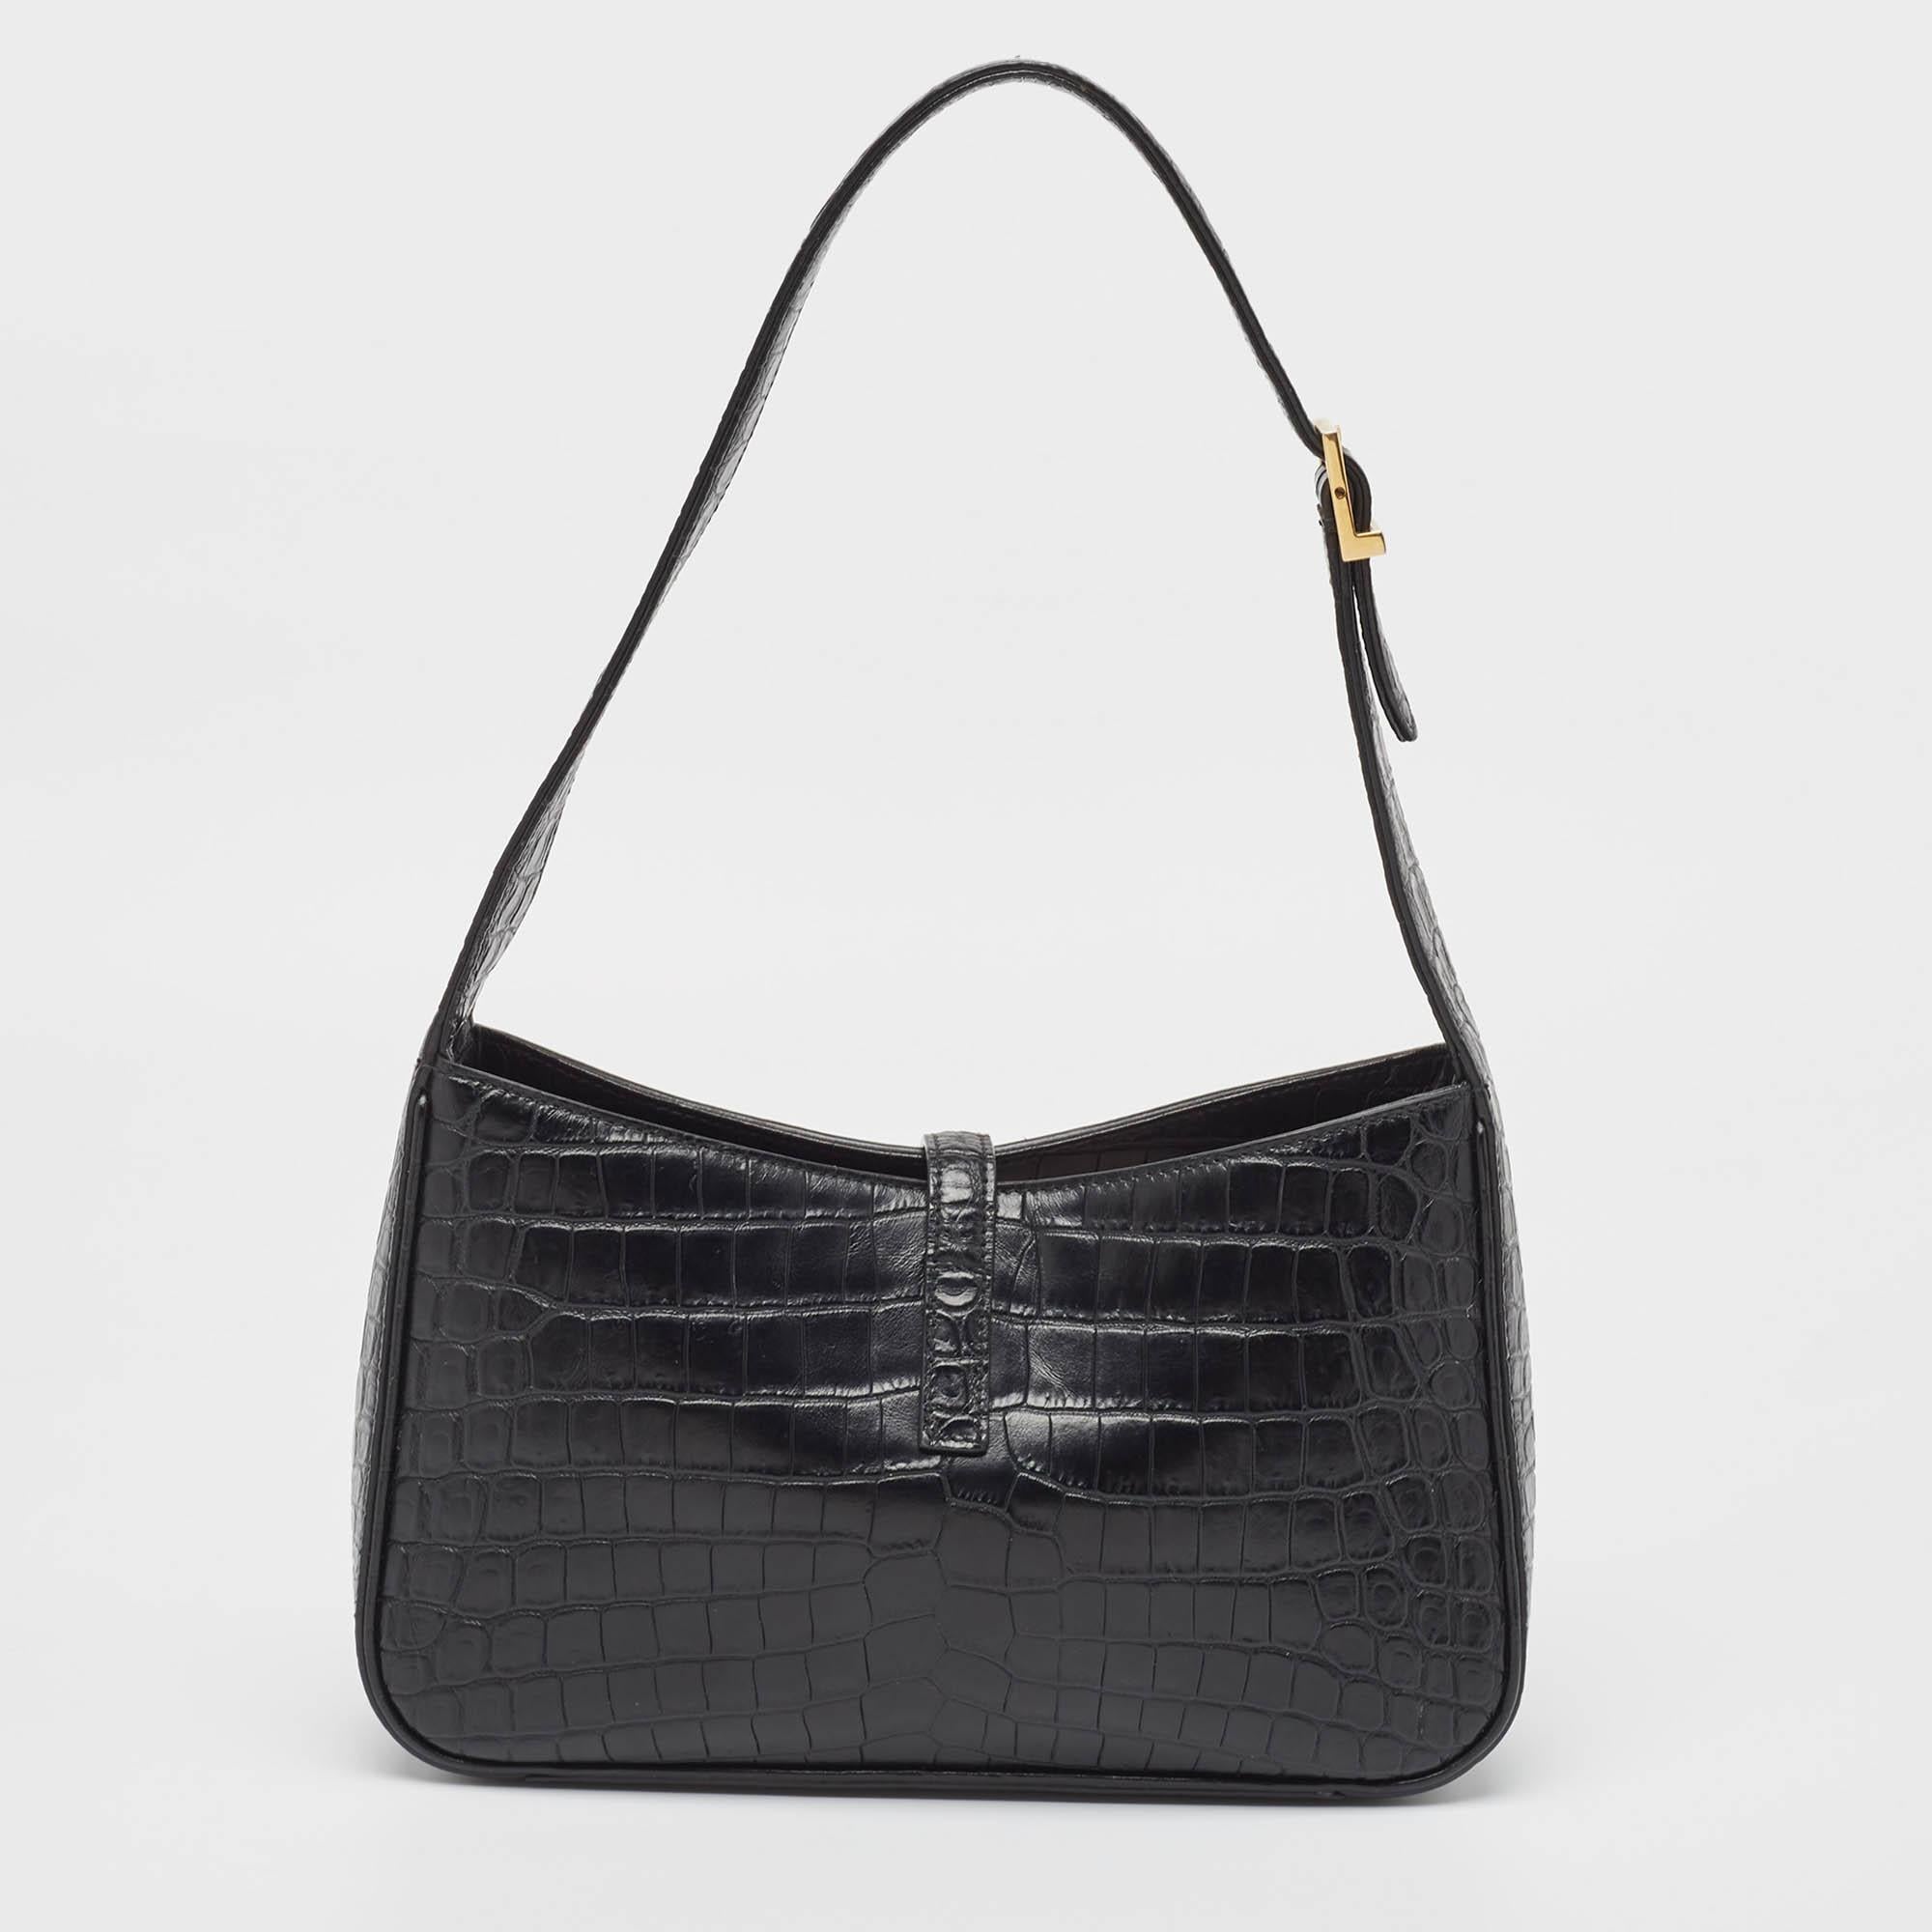 Classic in design and easy to hold, this hobo from Saint Laurent is worth investing in. The hobo is crafted from croc-embossed leather and gold-tone hardware. The YSL-detailed strap opens to an Alcantara-lined interior that can easily carry all your